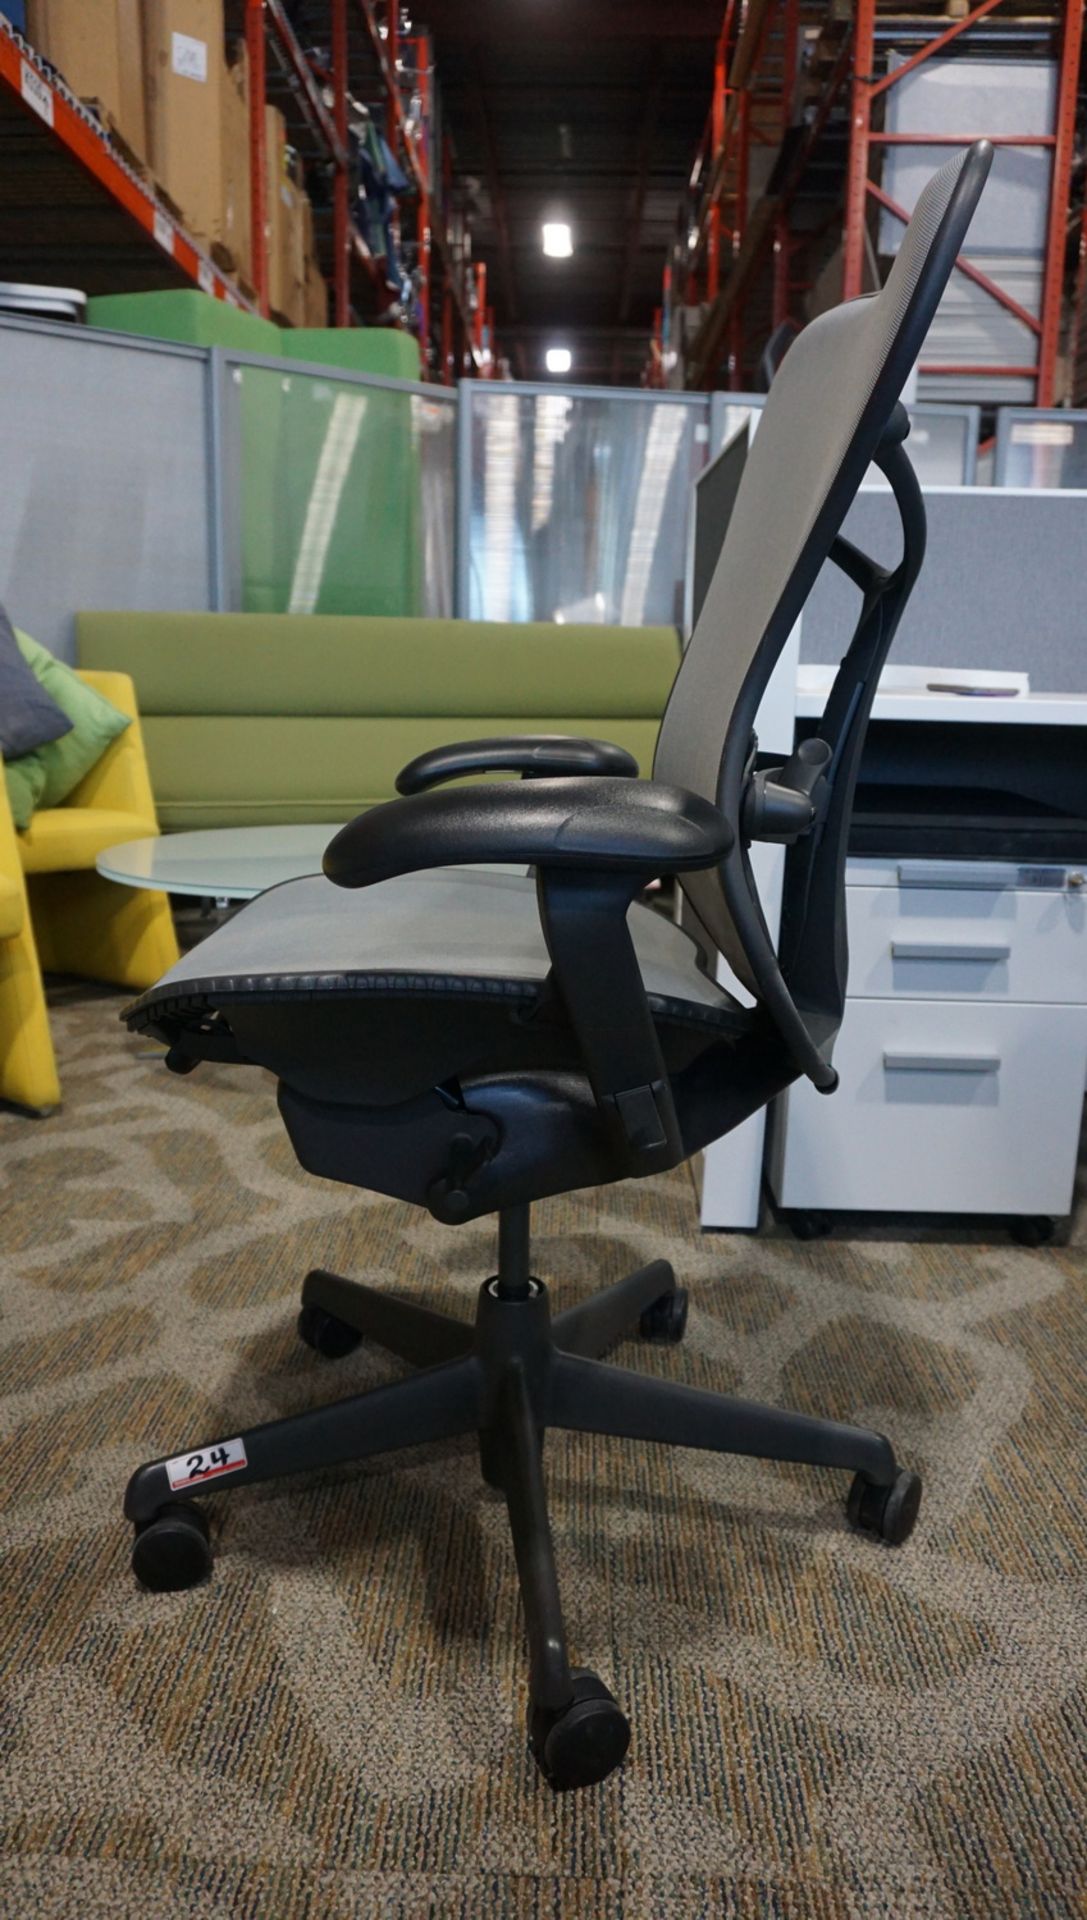 HERMAN MILLER MIRRA 1 OFFICE CHAIR W/ LUMBAR SUPPORT, BACK LOCK, ARM / SEAT ADJUSTMENTS - Image 4 of 5